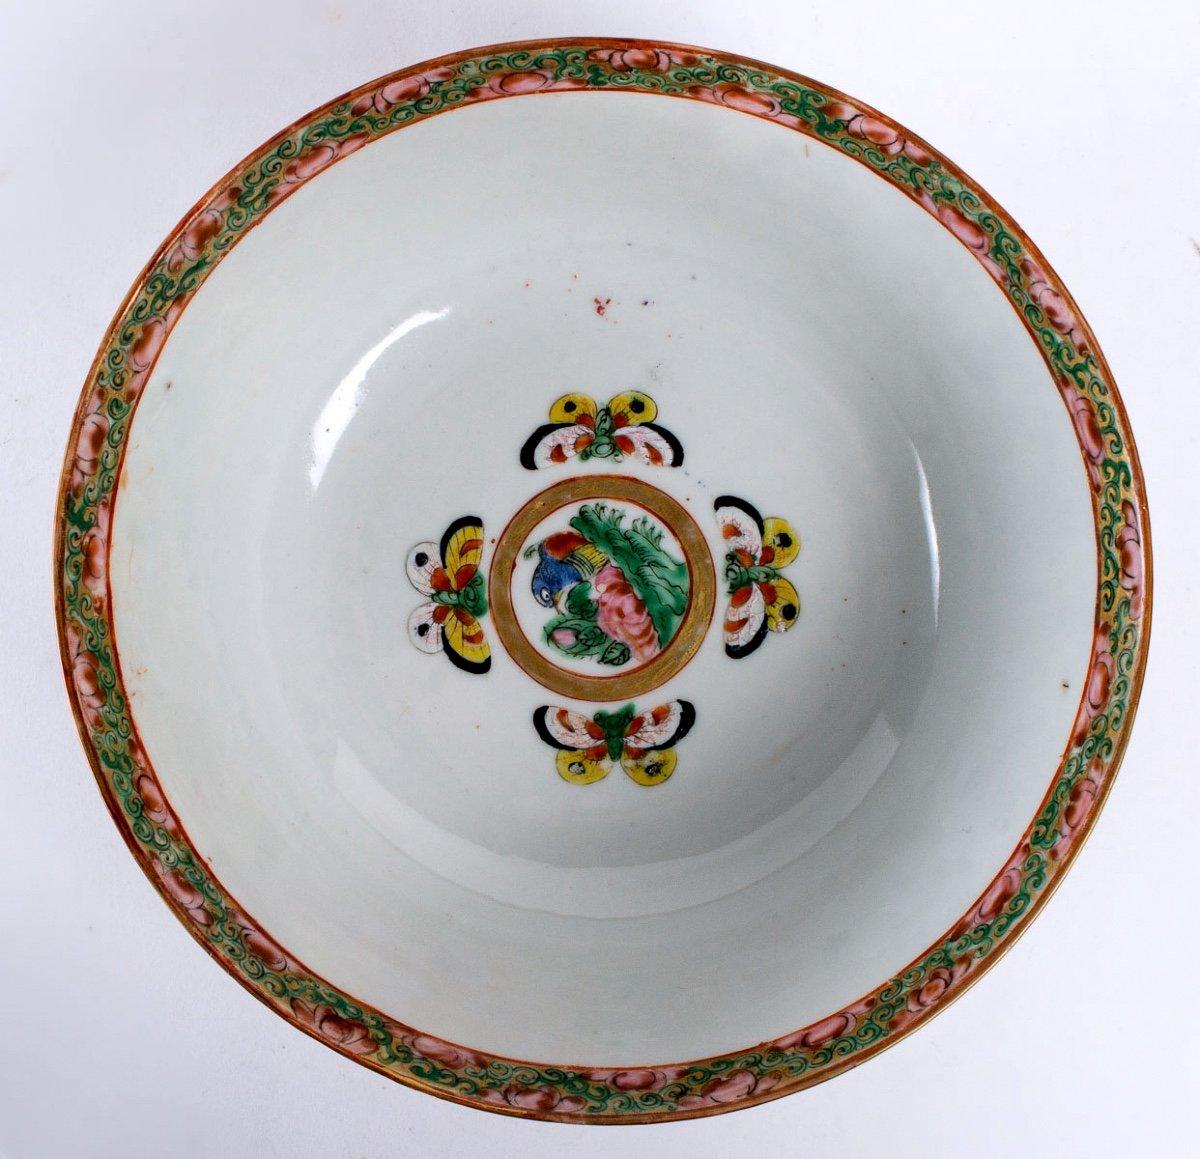 Lovely polychrome porcelain bowl from Canton. We find on this Canton porcelain the characteristic decoration painted on a white background representing large polylobed medallions or cartridges alternating palace scenes and nature decorations with